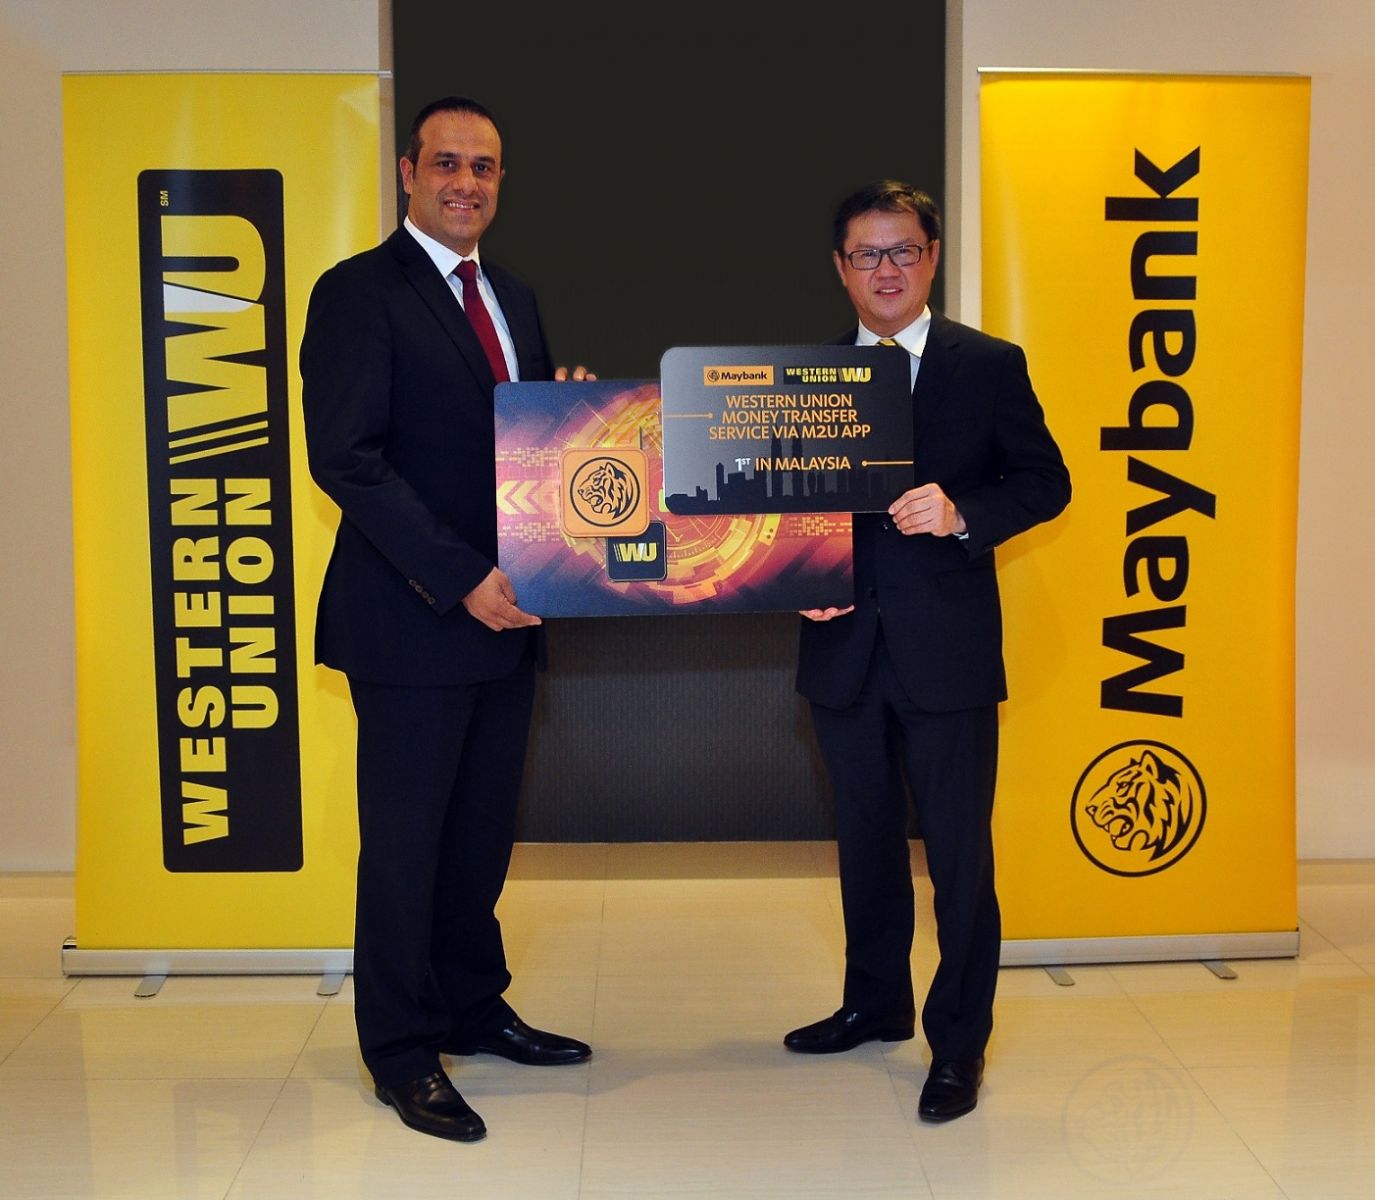 Maybank Launches First Mobile Money Transfer Service In Malaysia With Western Union Digital News Asia